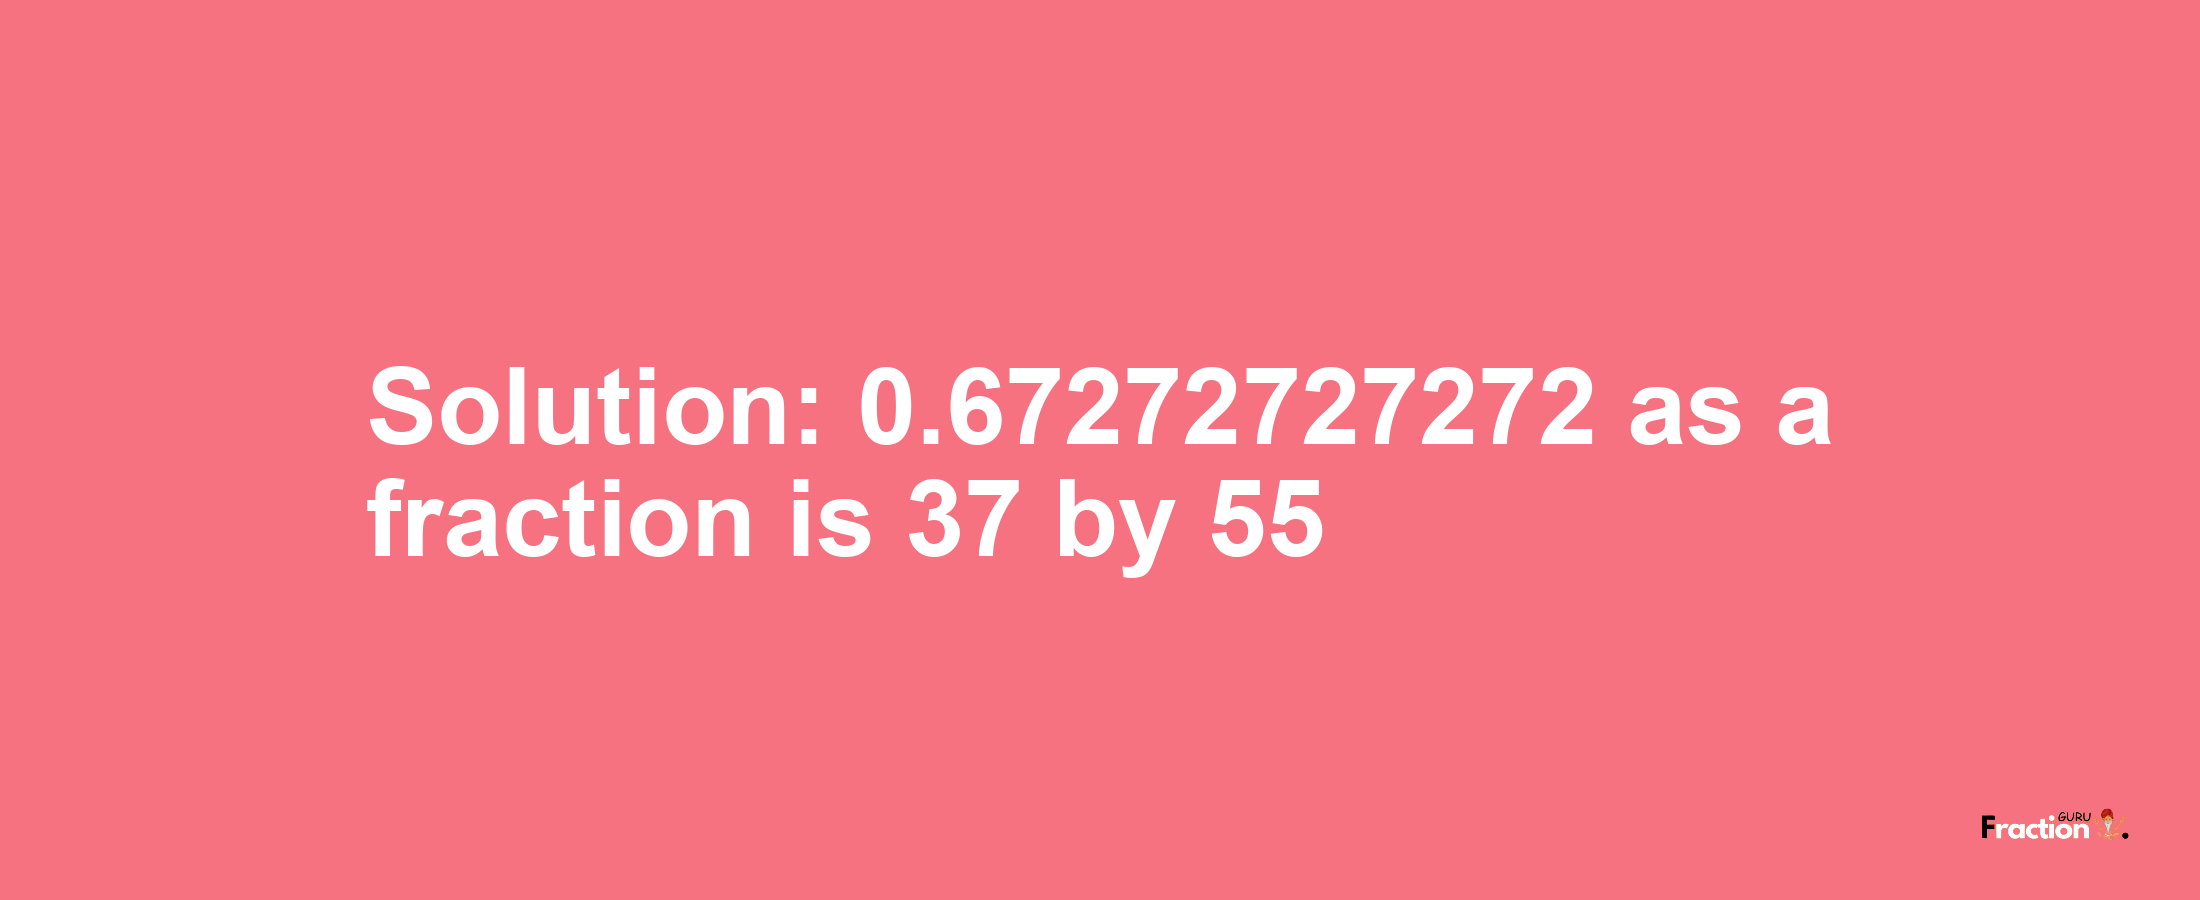 Solution:0.67272727272 as a fraction is 37/55